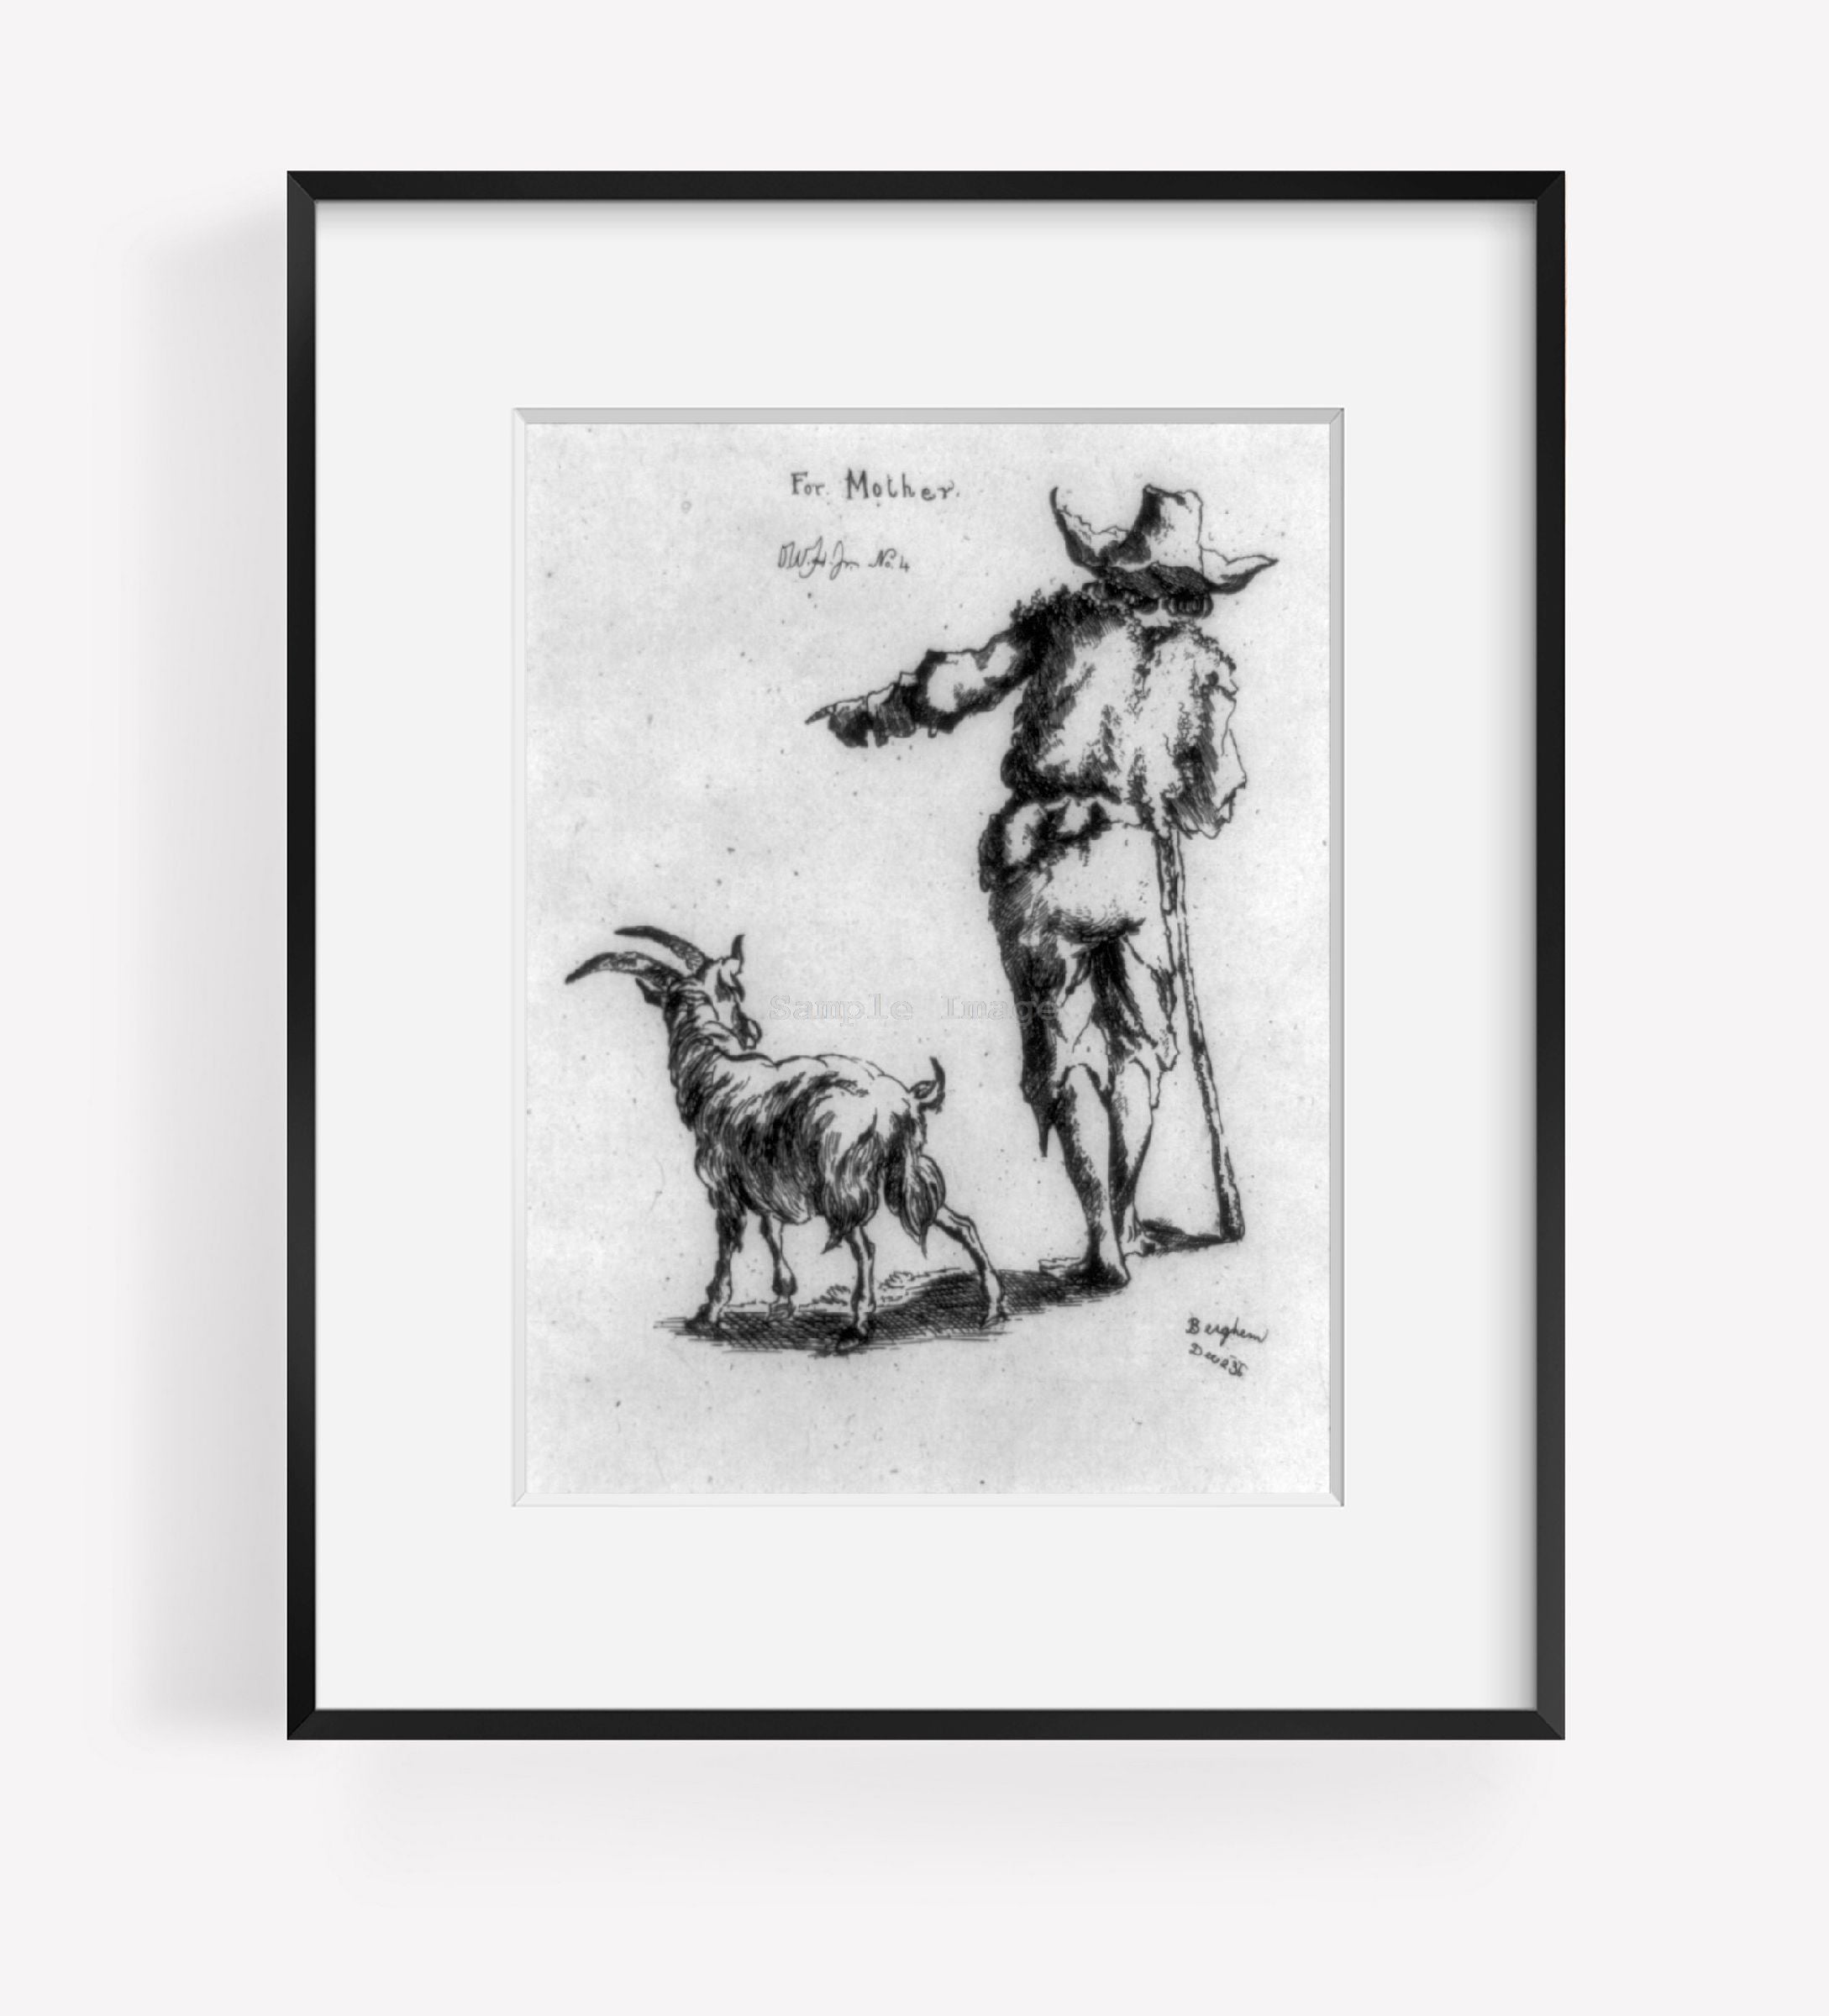 Vintage 1936? photograph: Etching of man and goat by Justice Oliver Wendell Holm